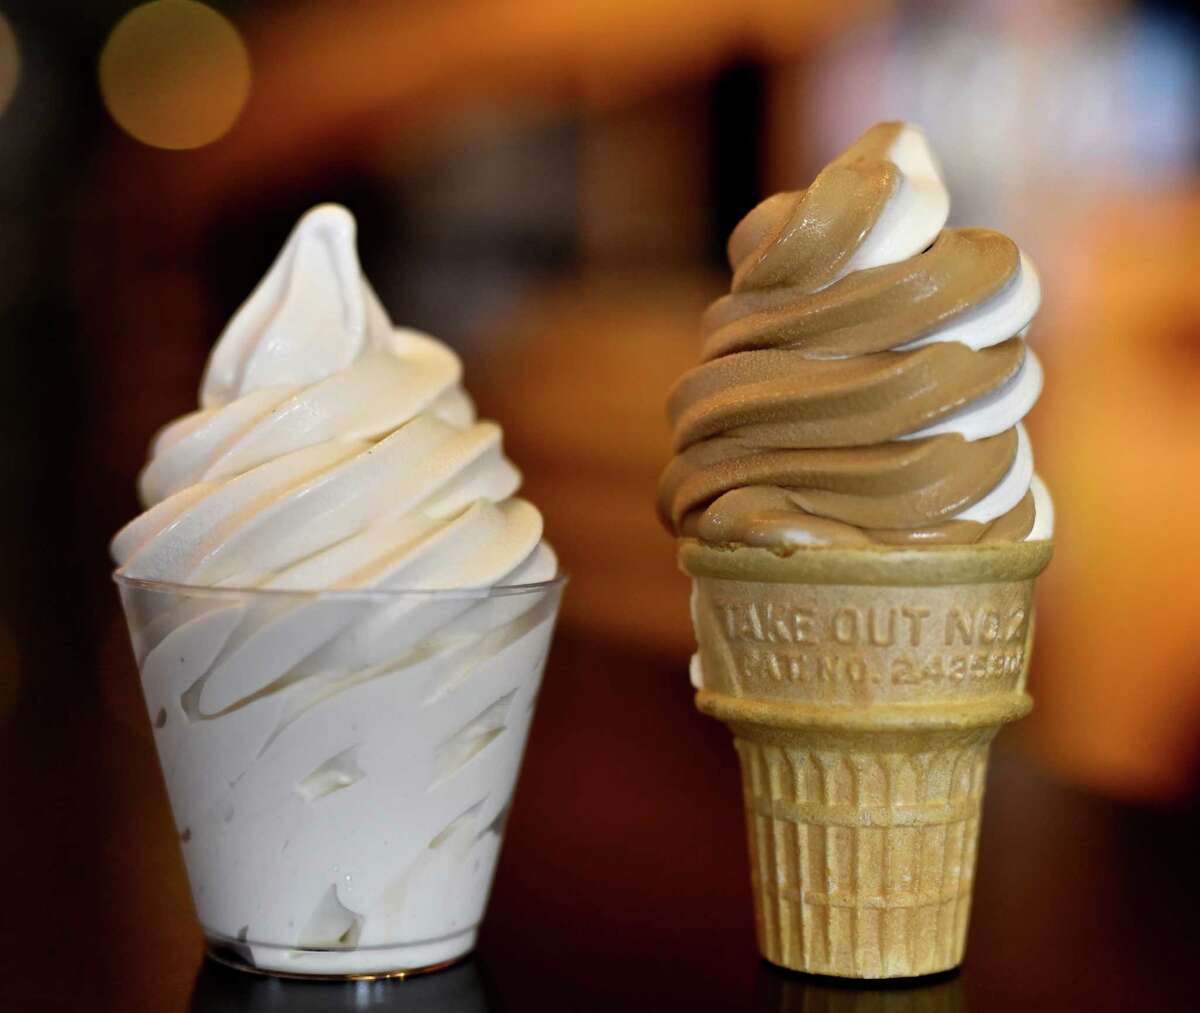 Bernie's Burger Bus is offering two new soft service ice cream flavors: Doughnut Milk (made with Hugs & Donuts) and coffee made with Katz Coffee. They're available individually or in a swirl.